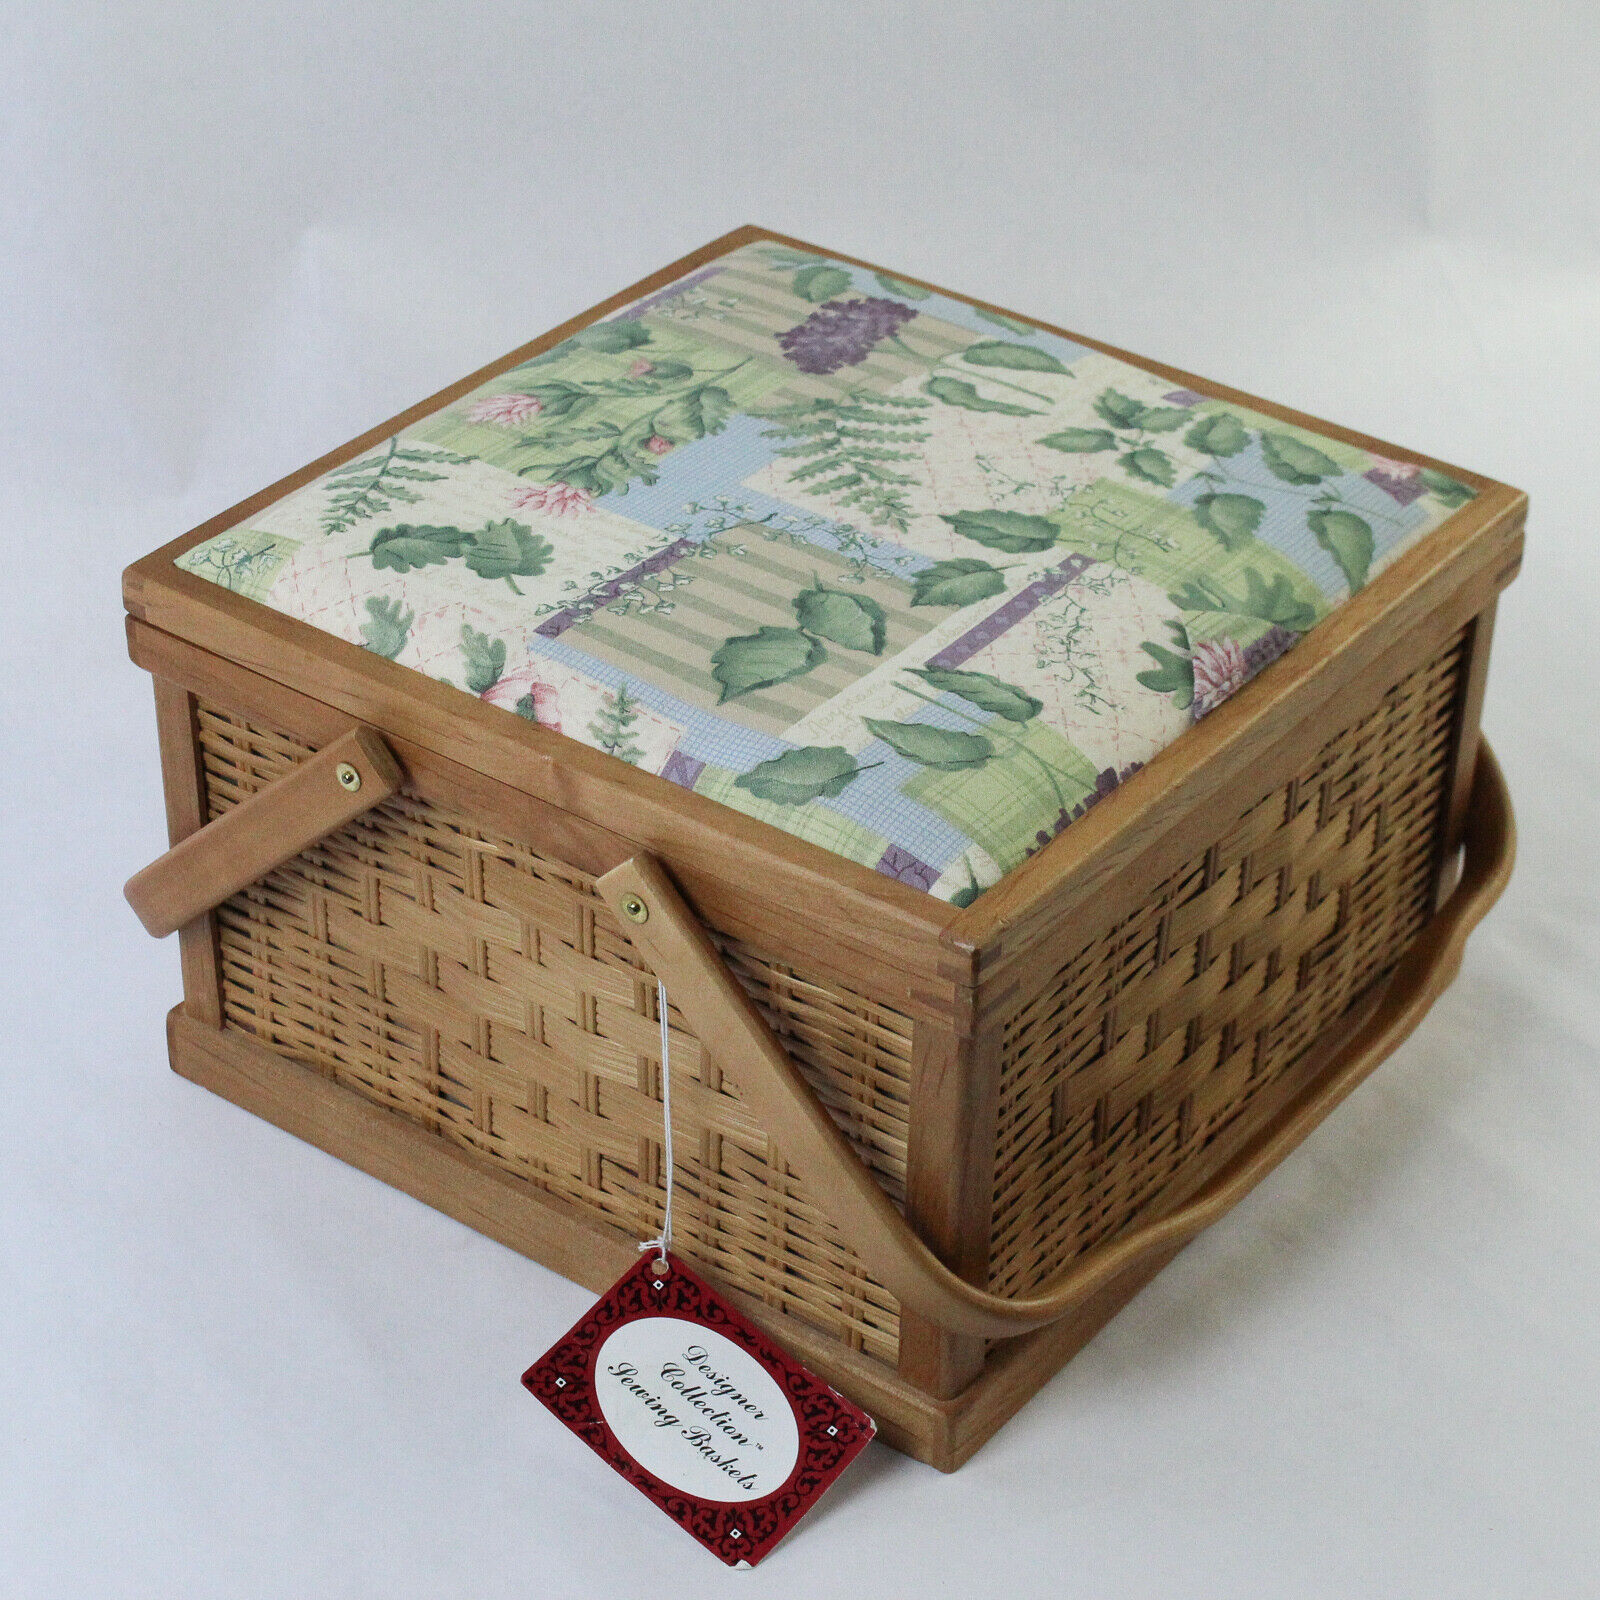 Vintage Jo Ann Stores Wicker Woven Sewing Box Basket Double Handles Floral New